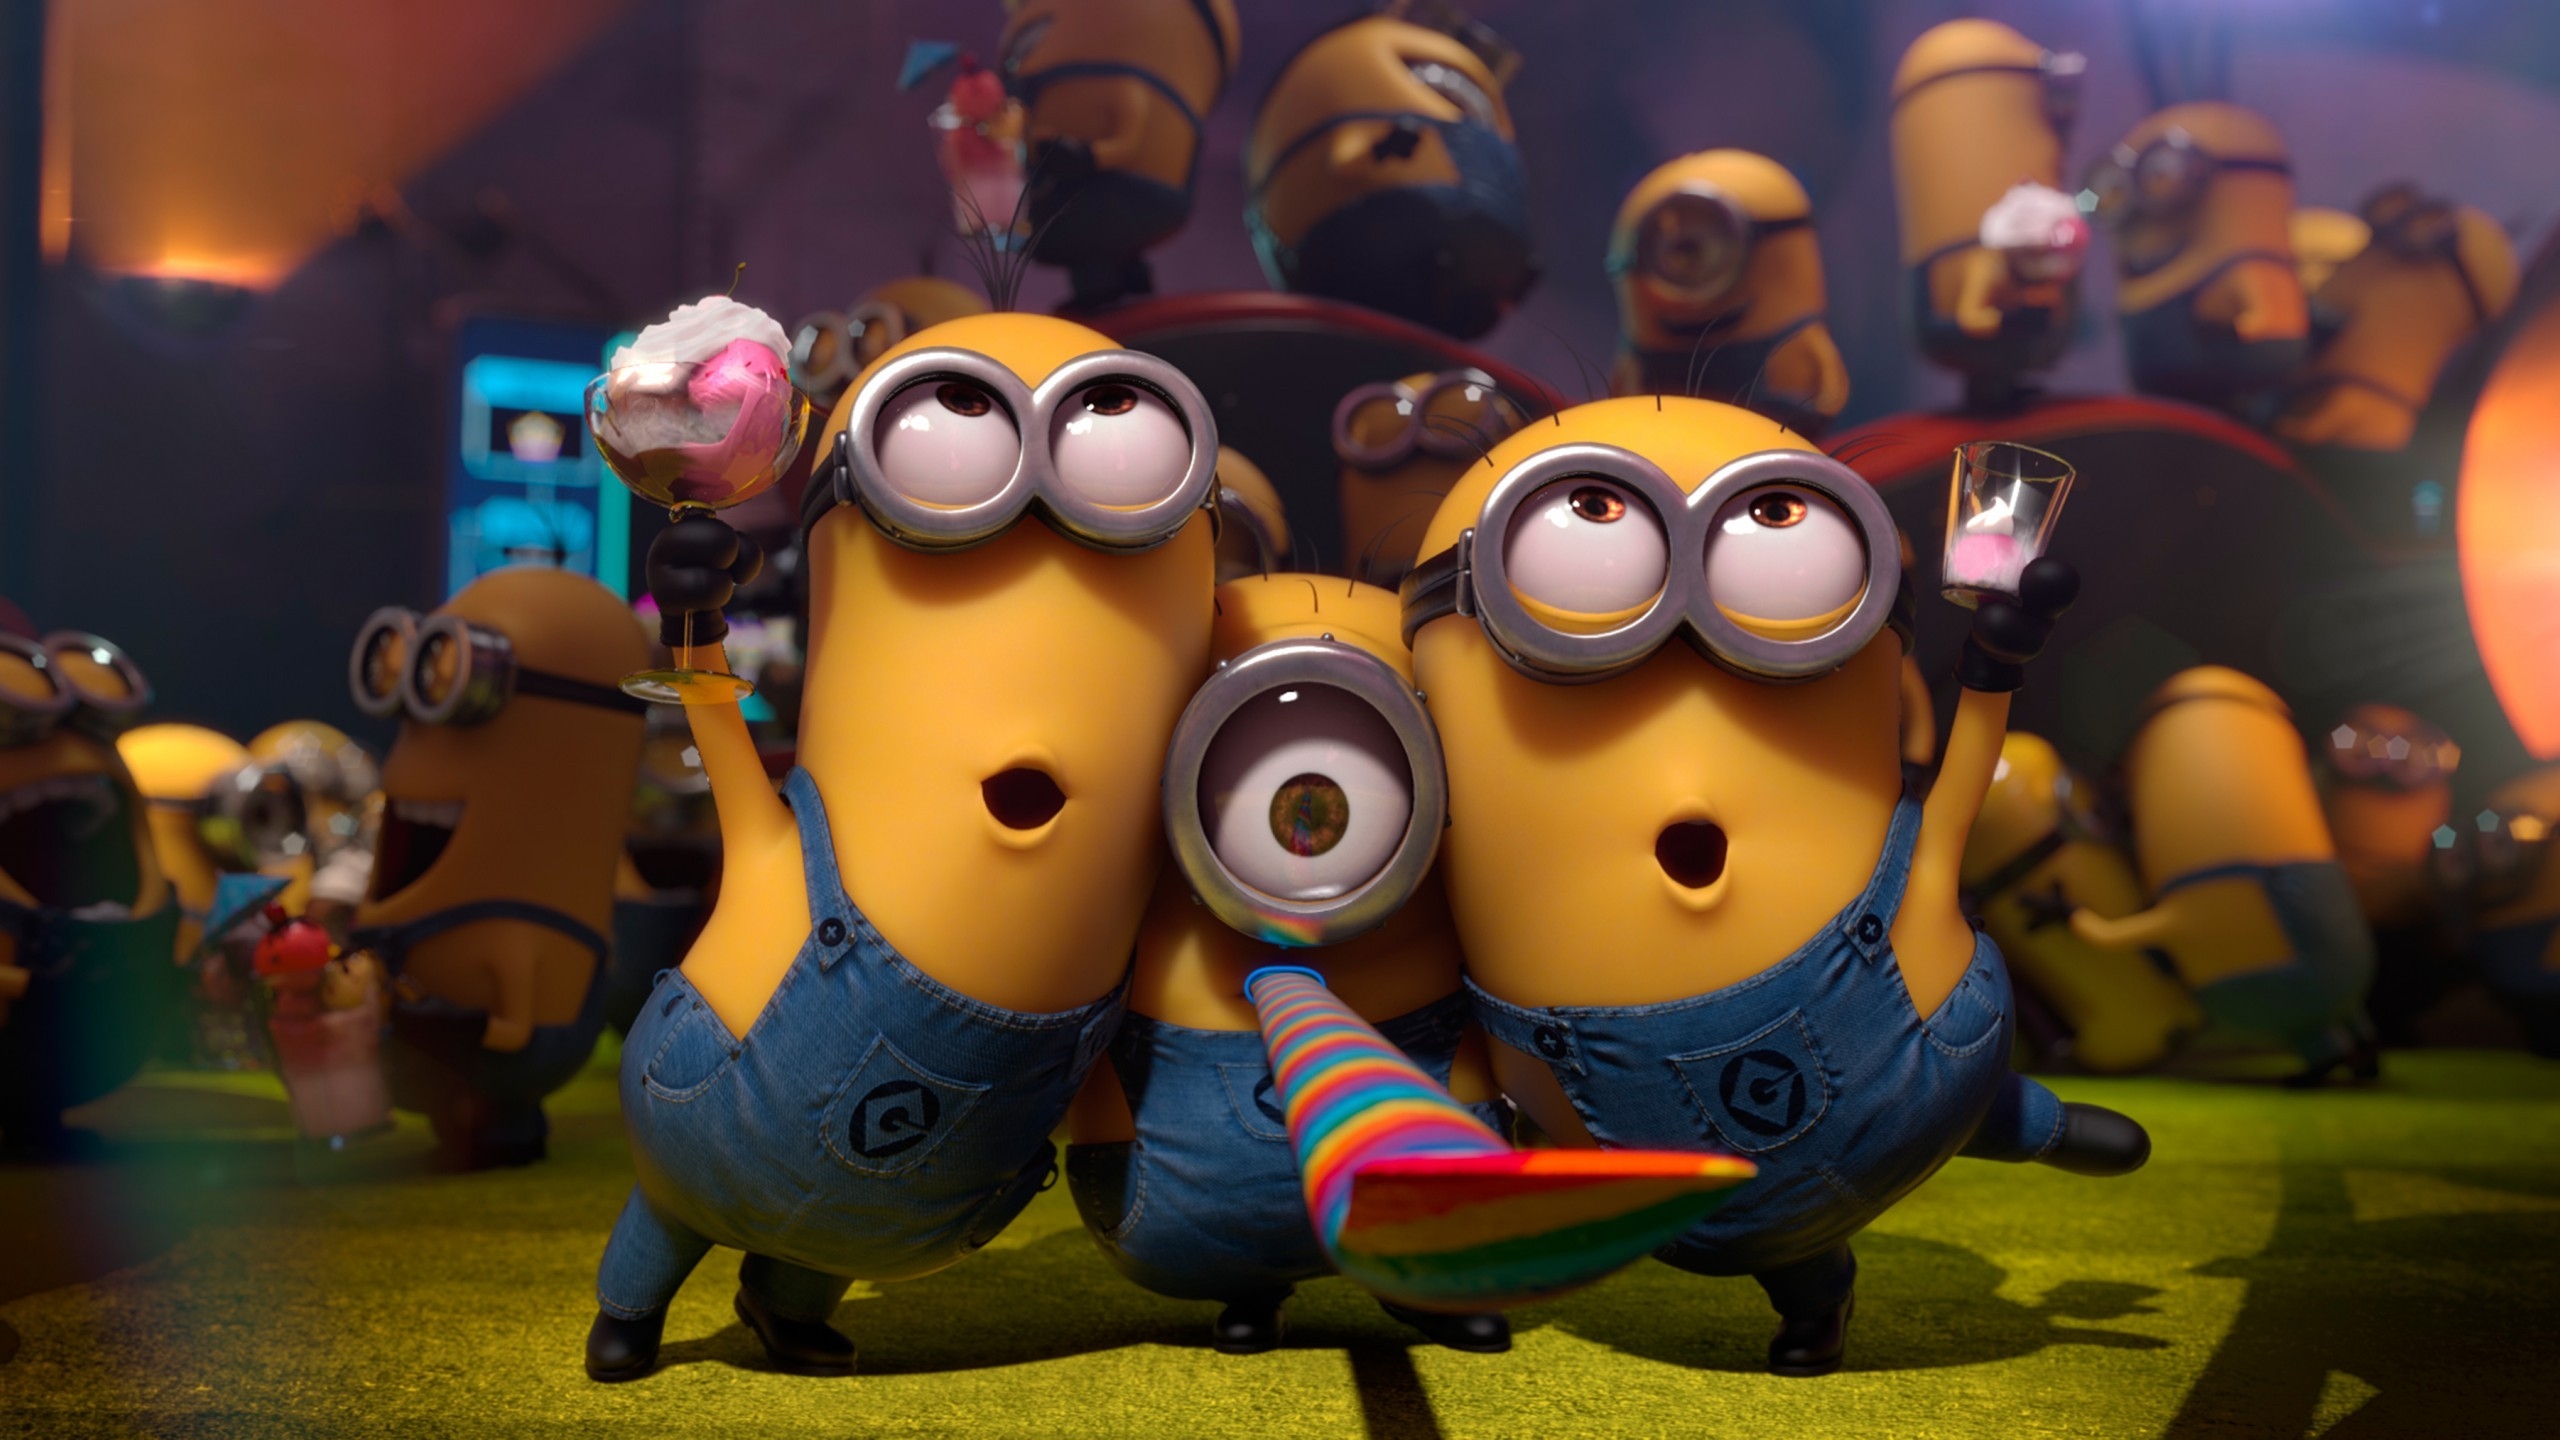 2013 Despicable Me 2 Poster for 2560x1440 HDTV resolution